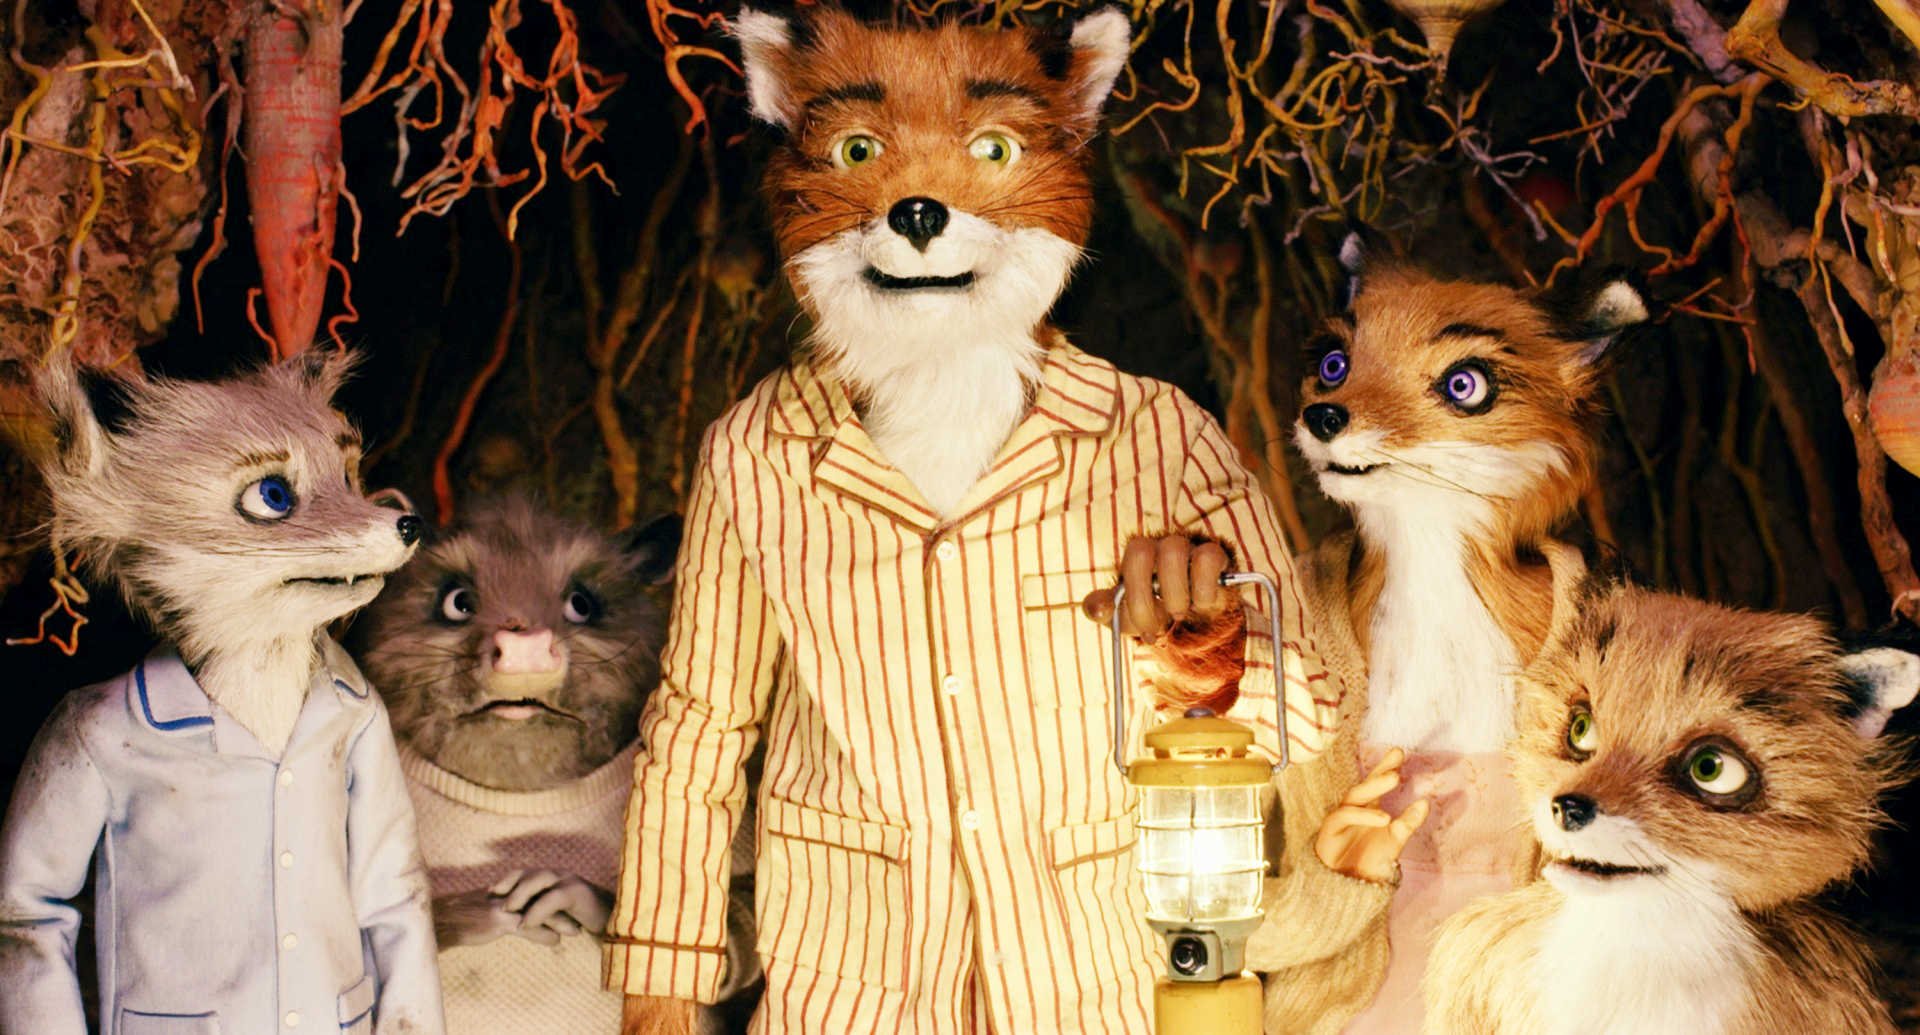 where can i watch fantastic mr fox for free